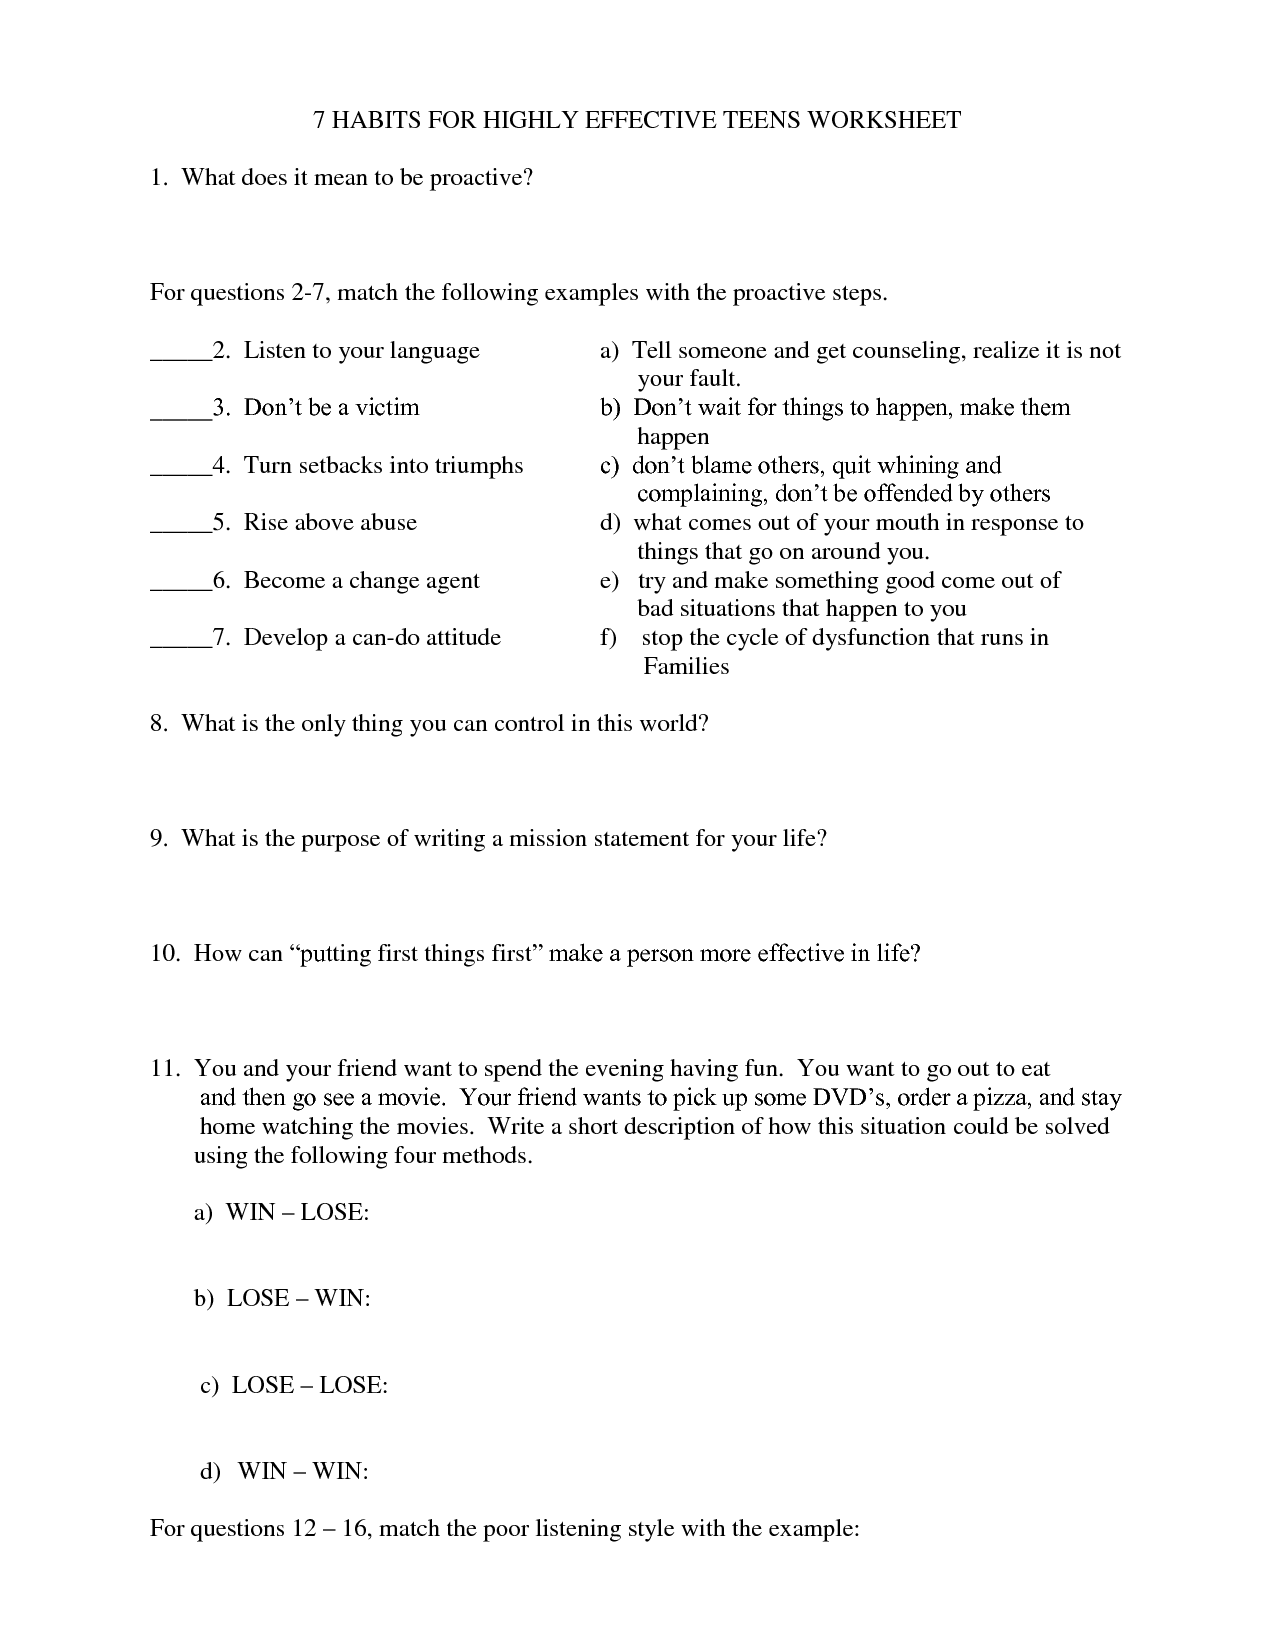 7 Habits of Highly Effective Teens Worksheets Image